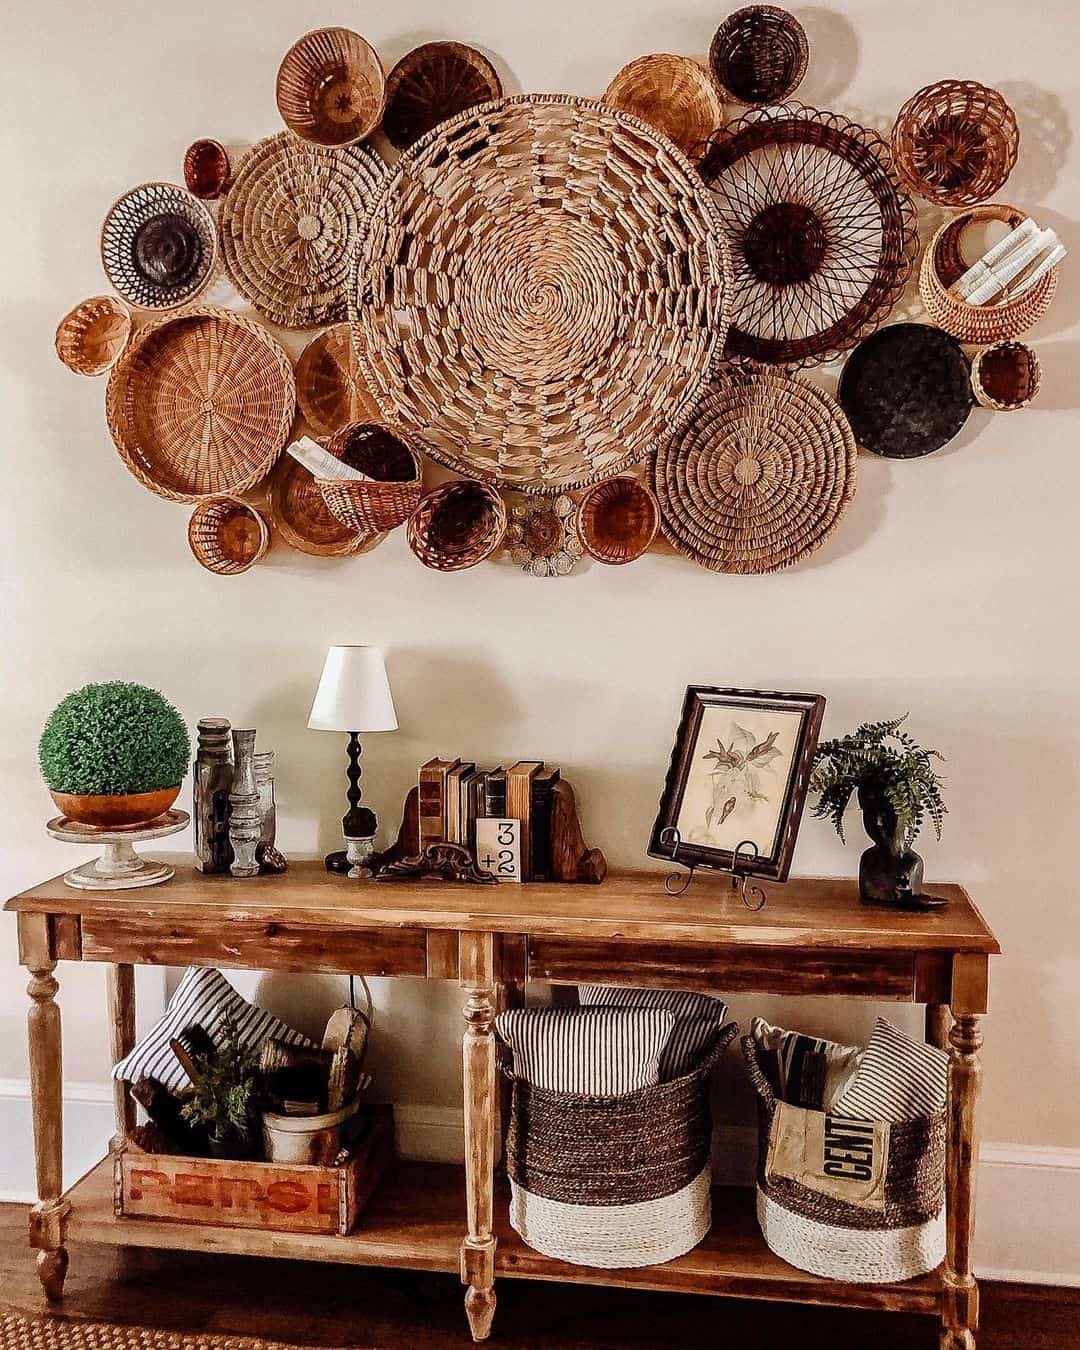 Rustic Vintage Table with Woven Baskets